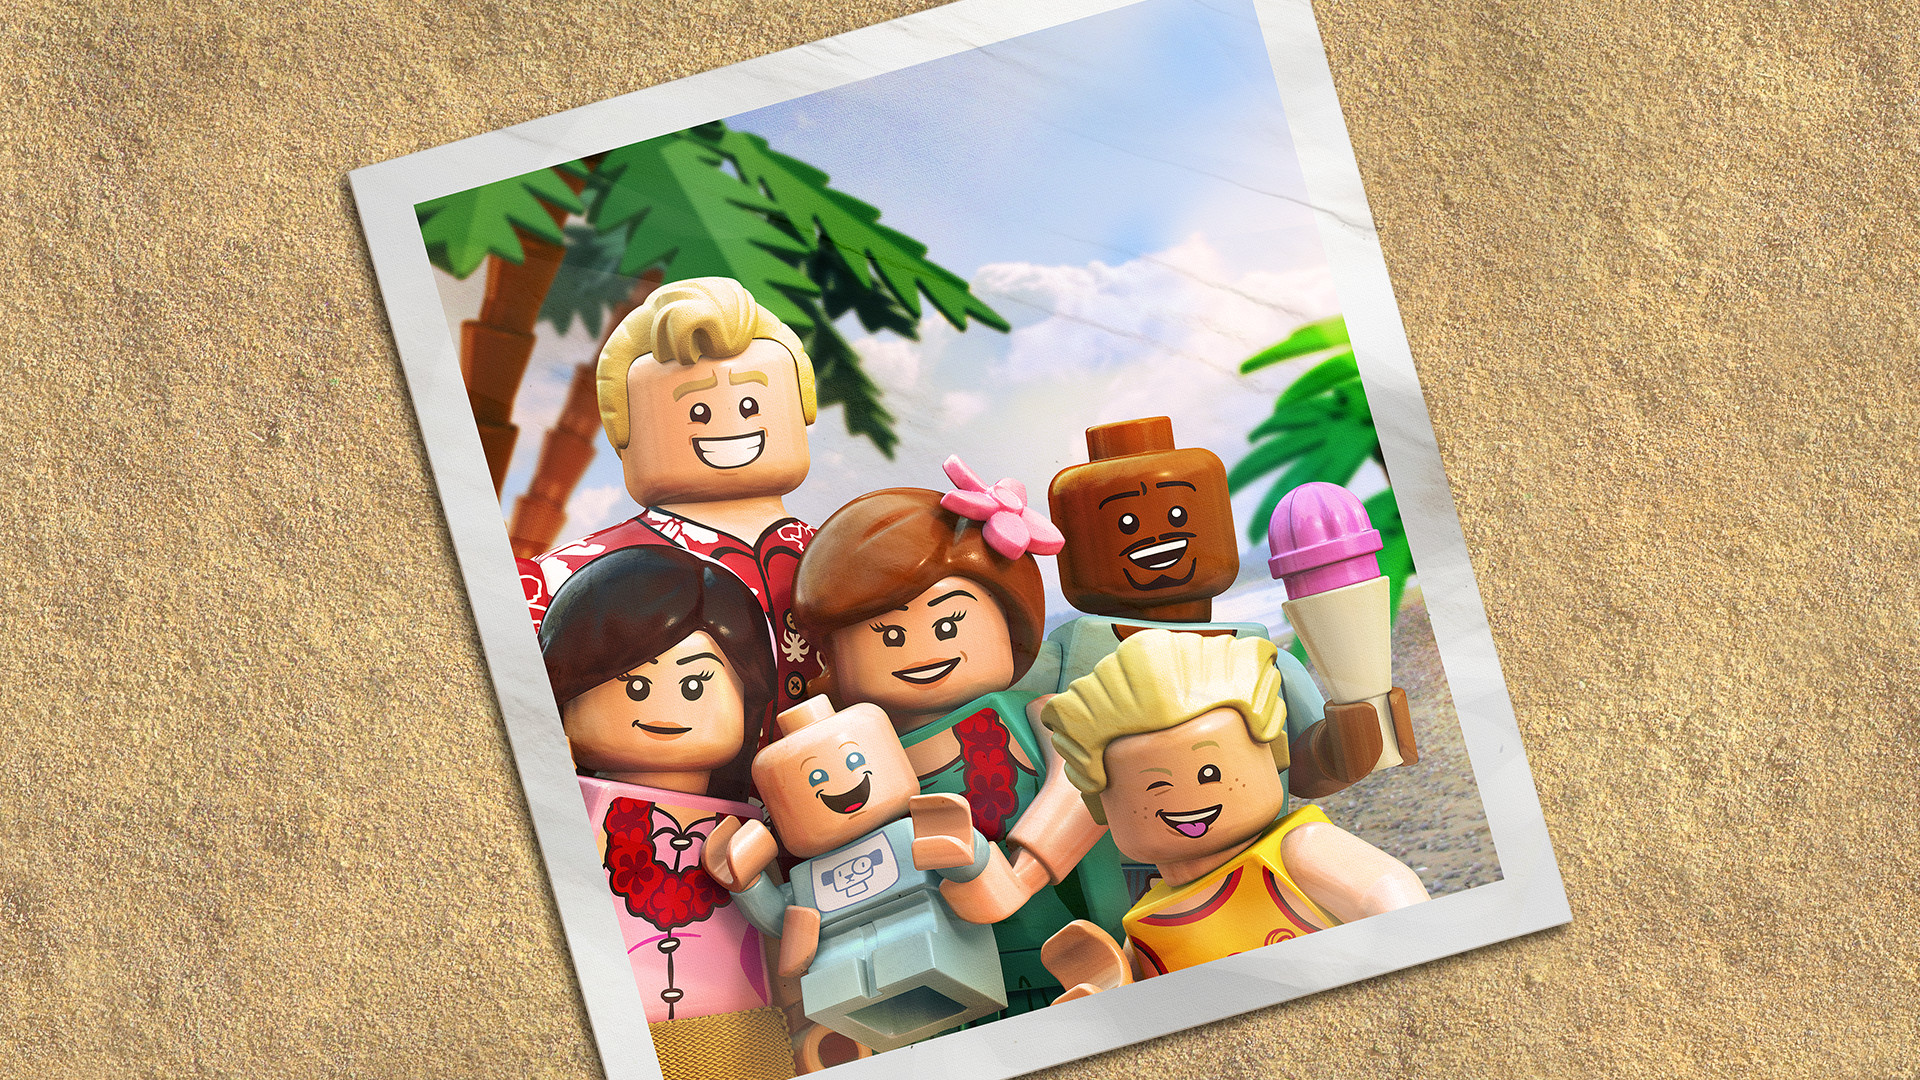 [$ 1.12] LEGO THE INCREDIBLES - Parr Family Vacation Character Pack DLC EU PS4 CD Key